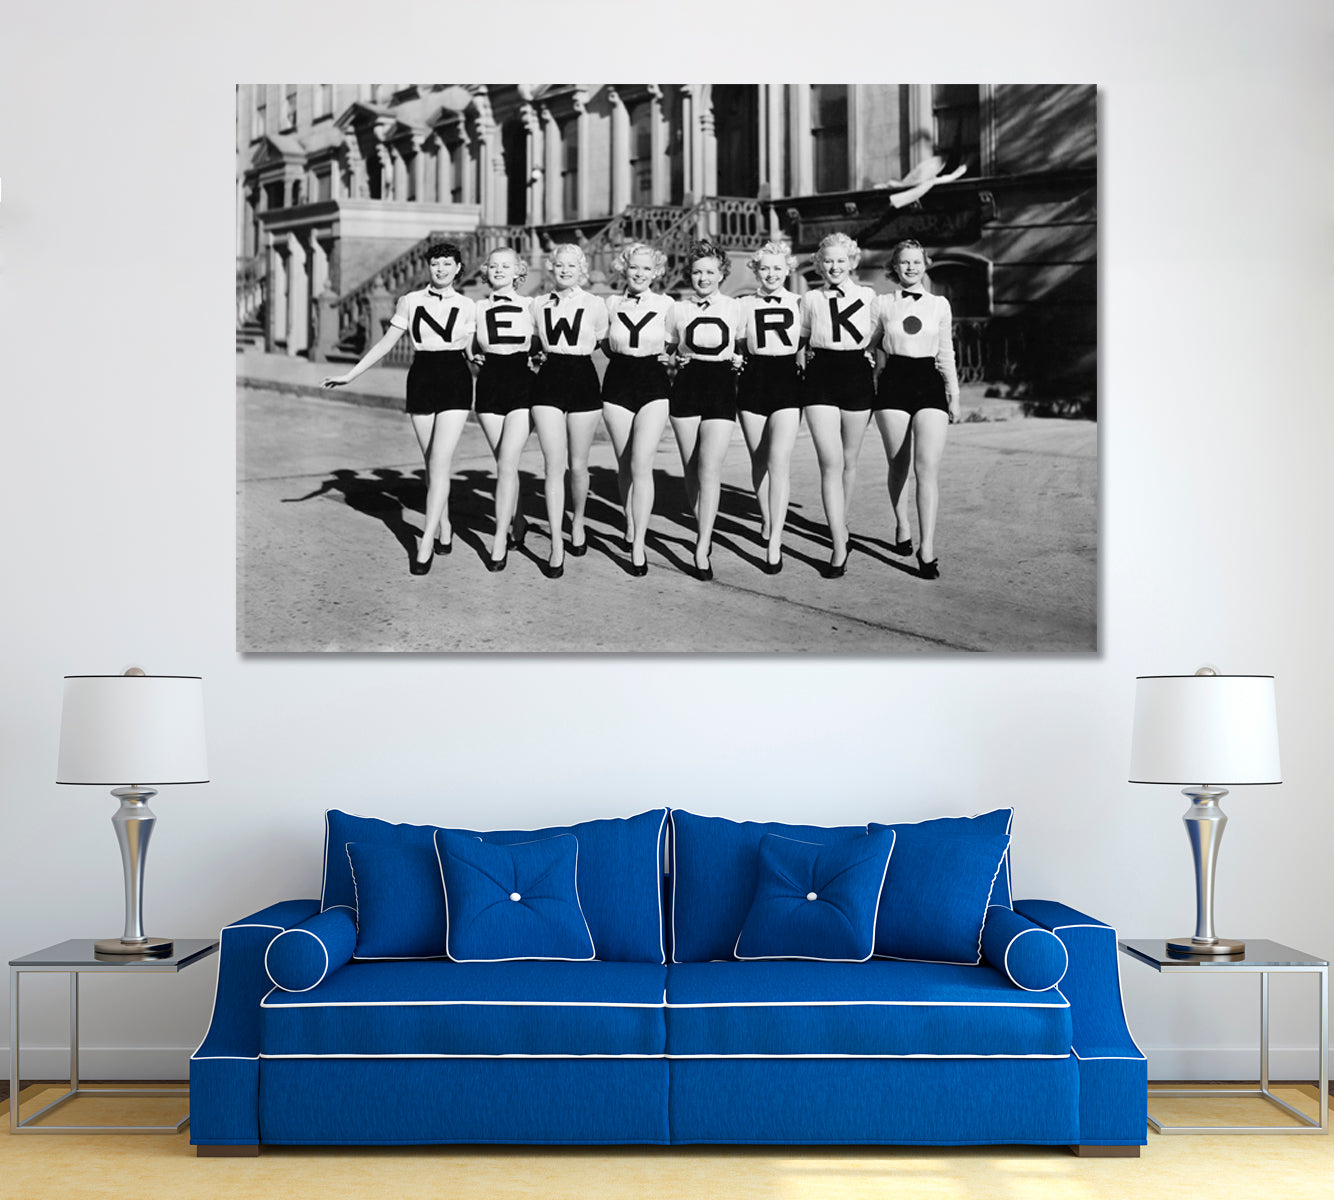 Retro Snapshot Chorus Line with New York on T-Shirts Canvas Print ArtLexy 1 Panel 24"x16" inches 